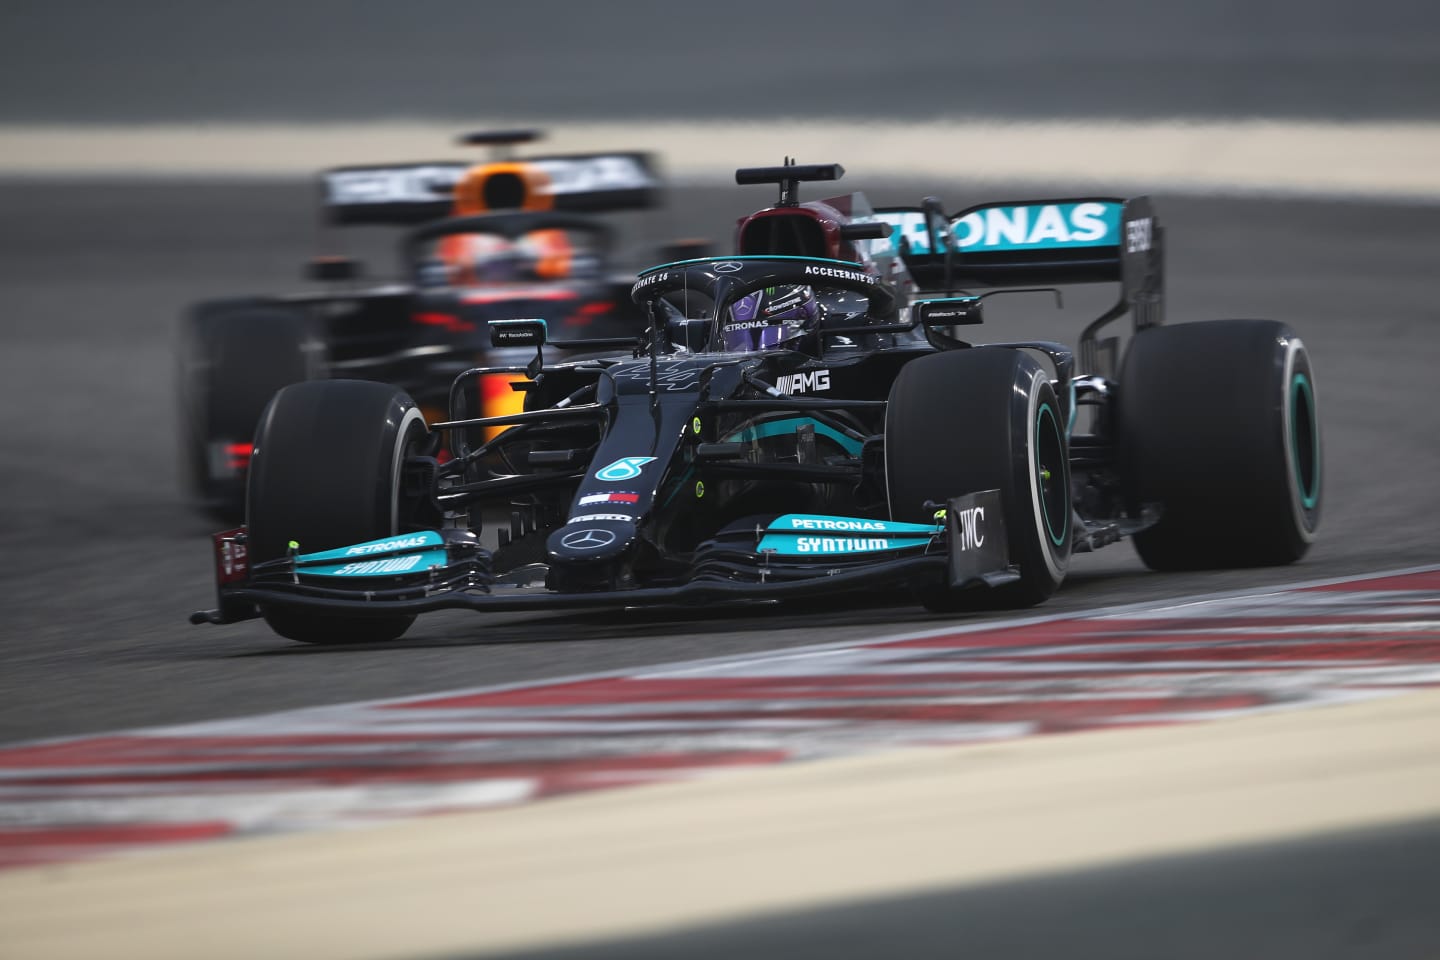 Hamilton took over for Mercedes in the afternoon, but Verstappen was the one setting the benchmarks with Red Bull